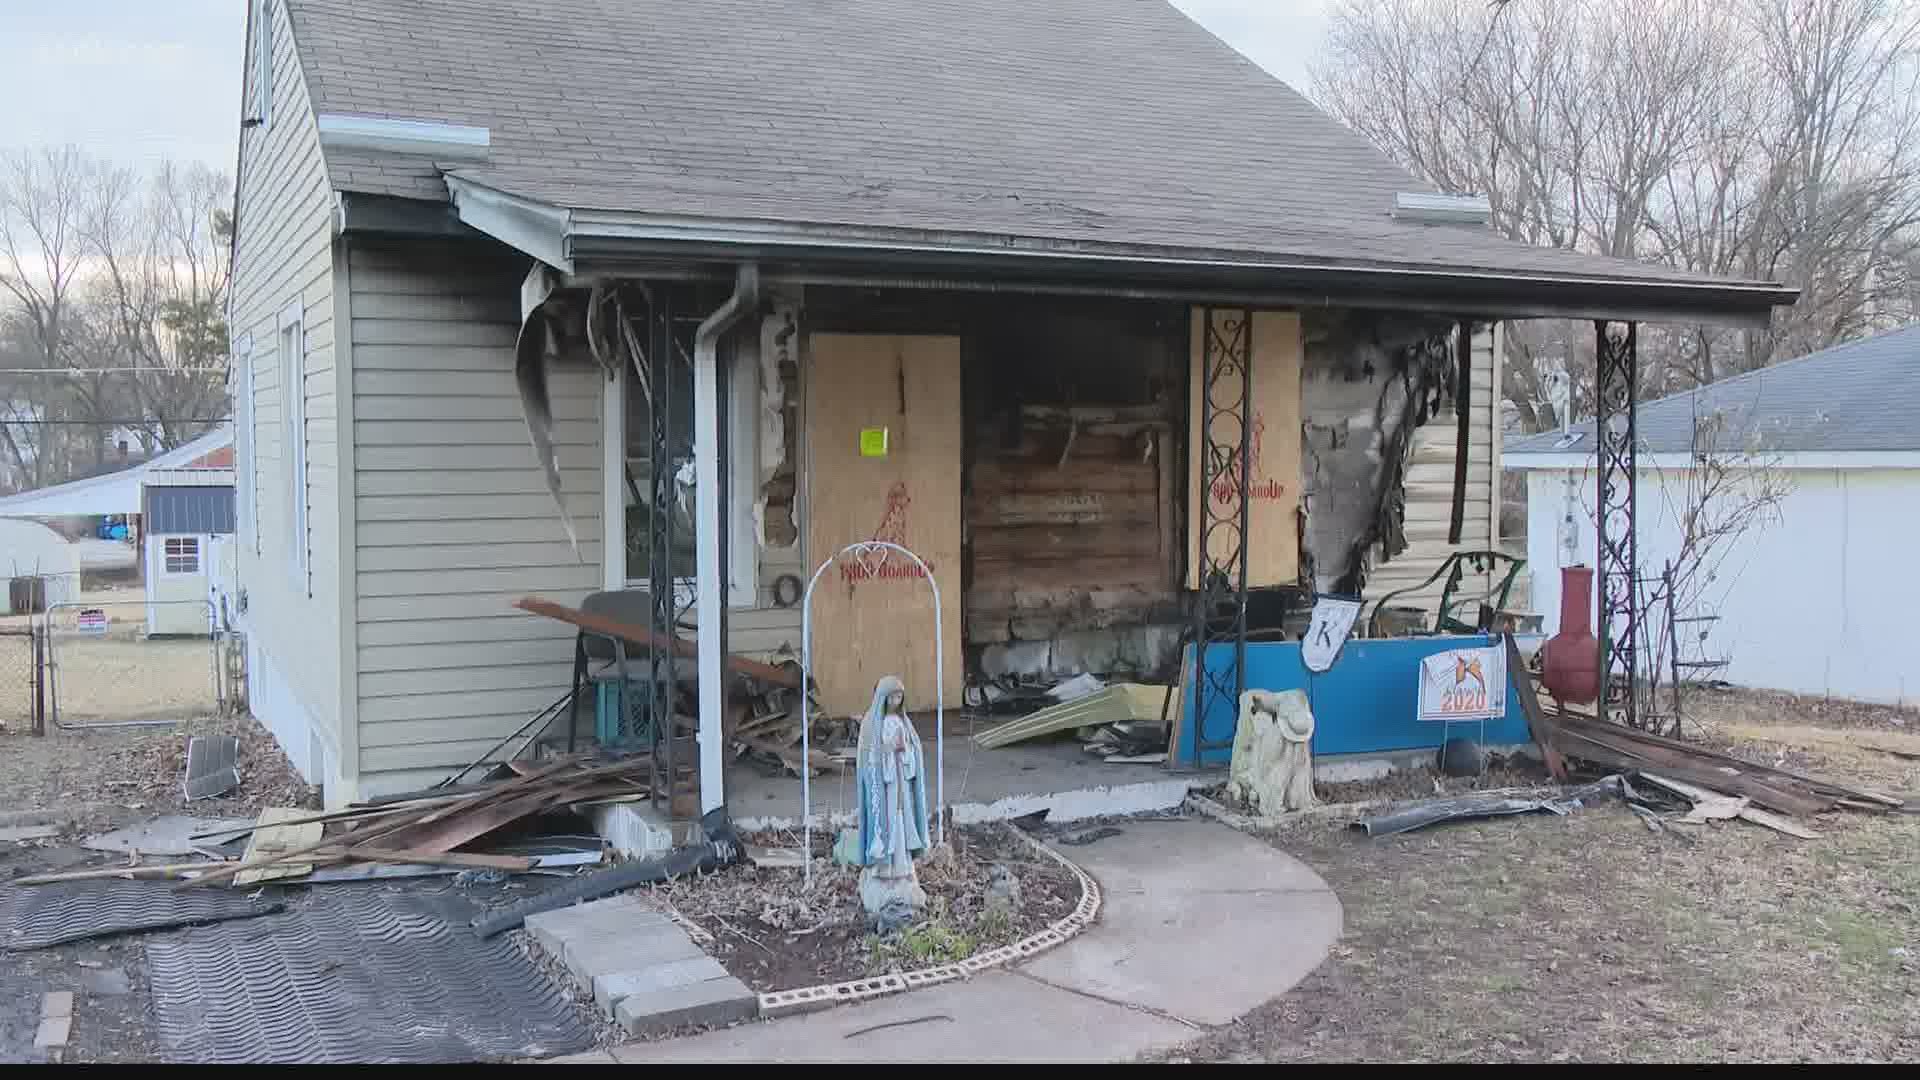 The family recently lost their home in a fire